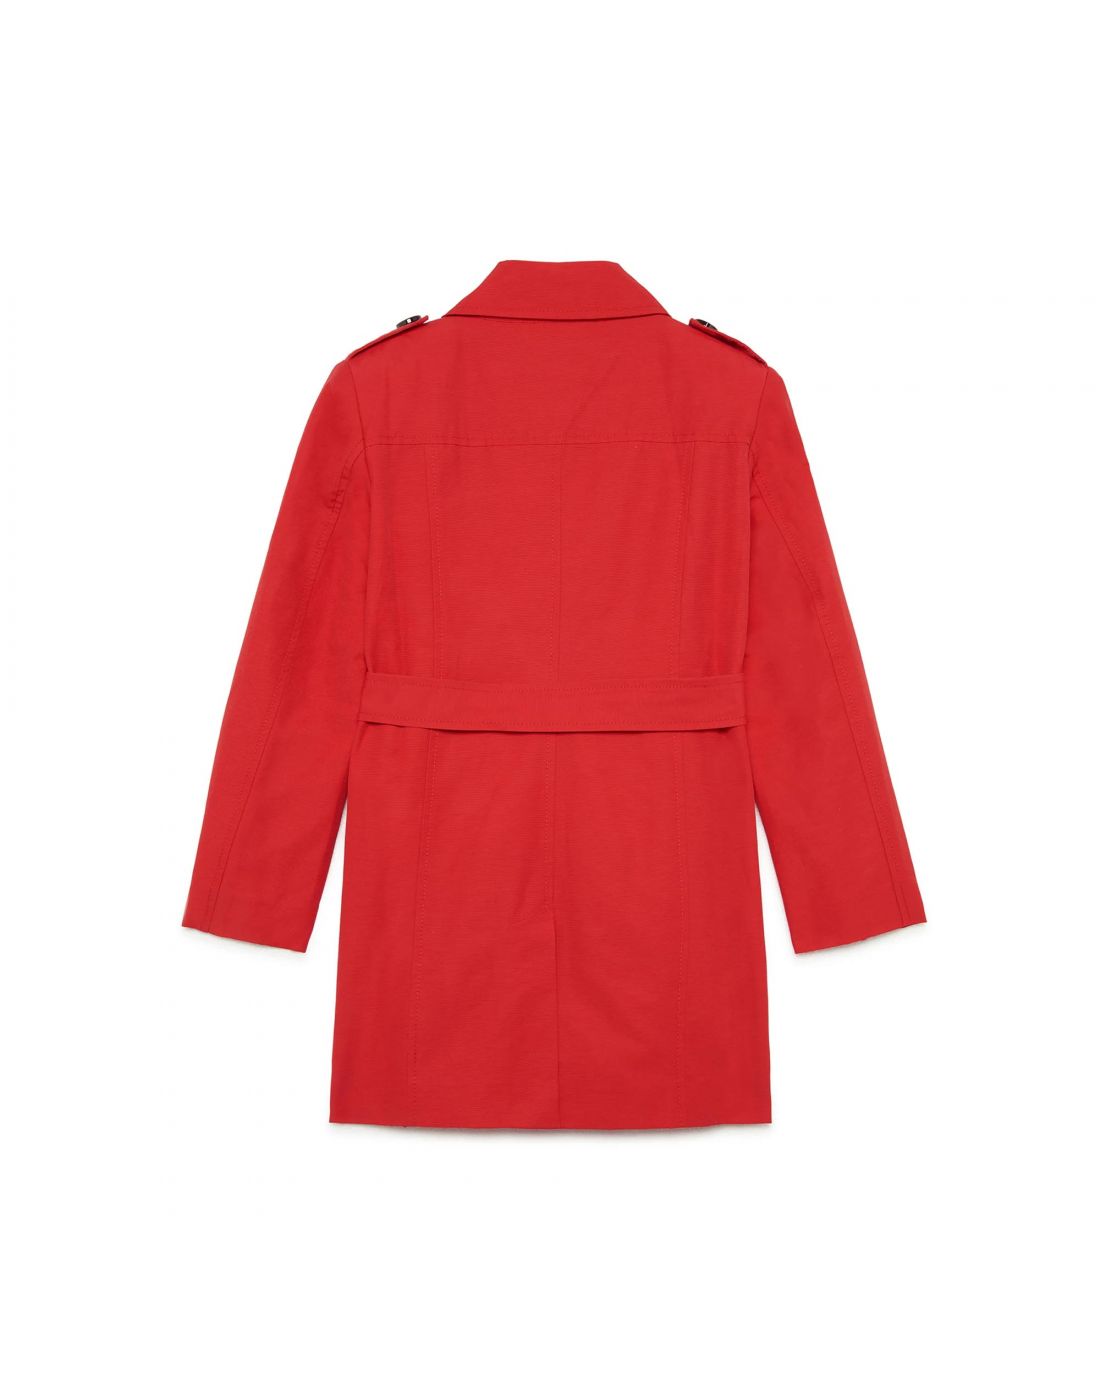 Max&co Girls Trench Coat